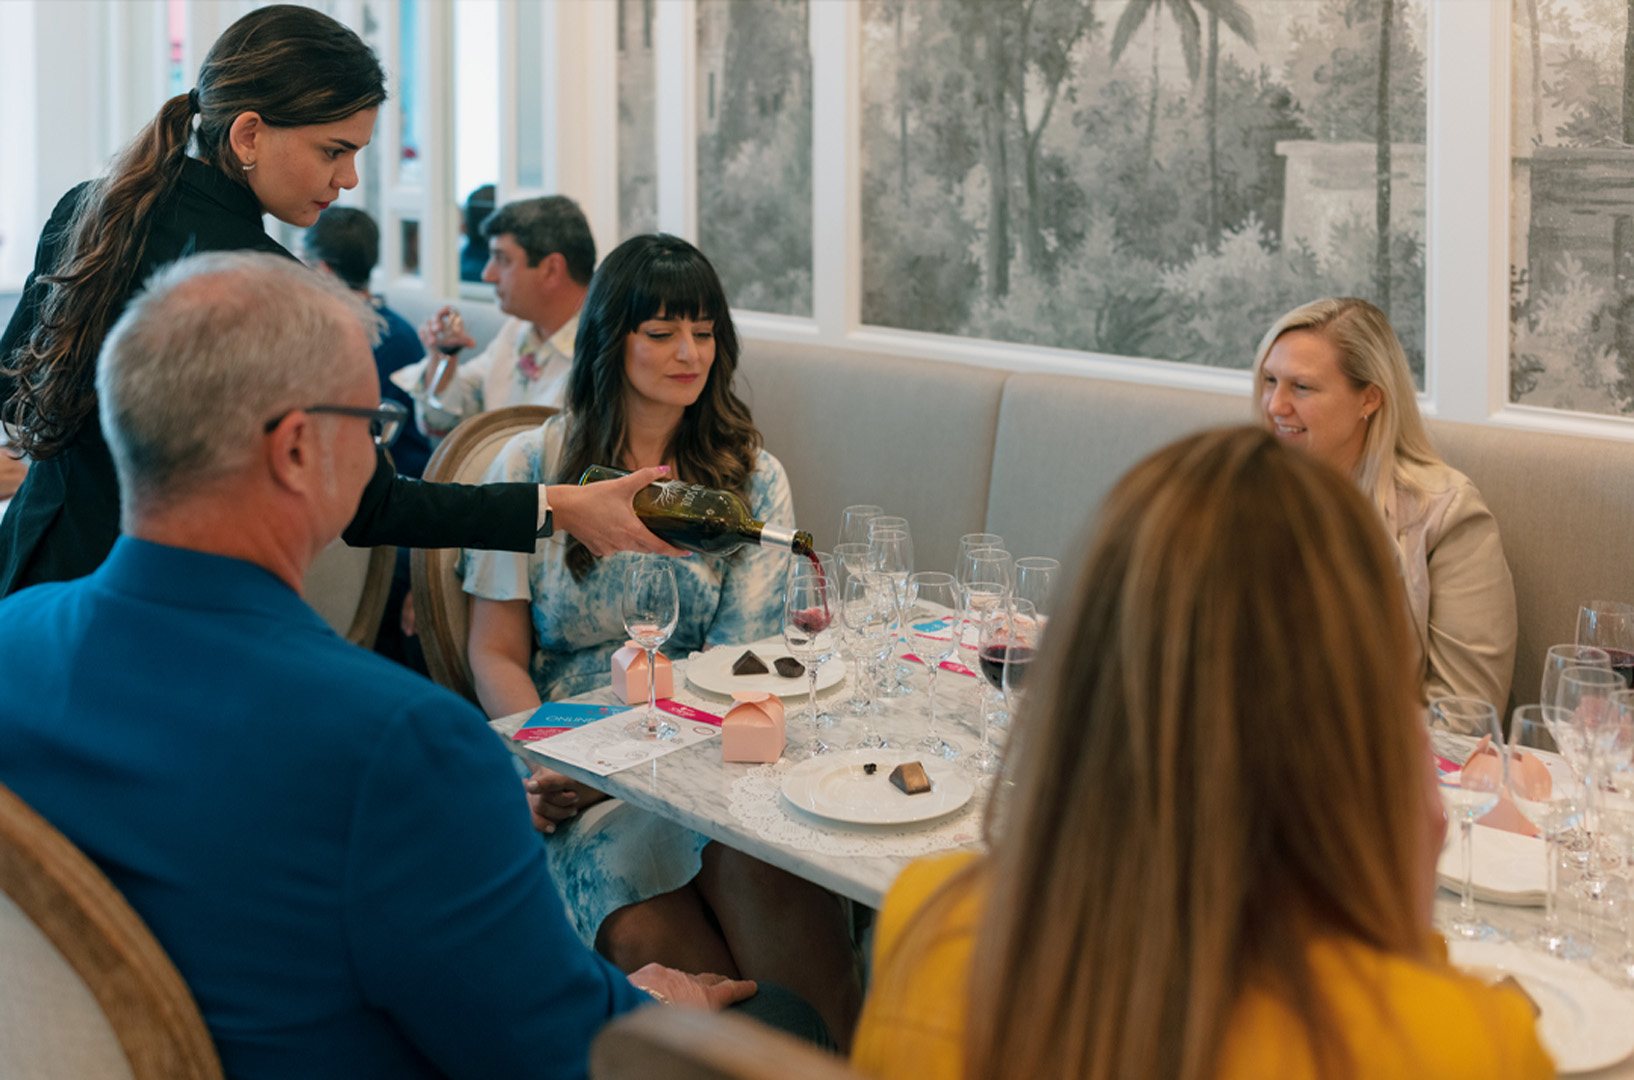 Vasalissa Chocolatier on Level 3 of Bal Harbour Shops hosted a Wine and Chocolate Pairing with South Beach Wine & Food Festival on Saturday, February 22nd, 2020.